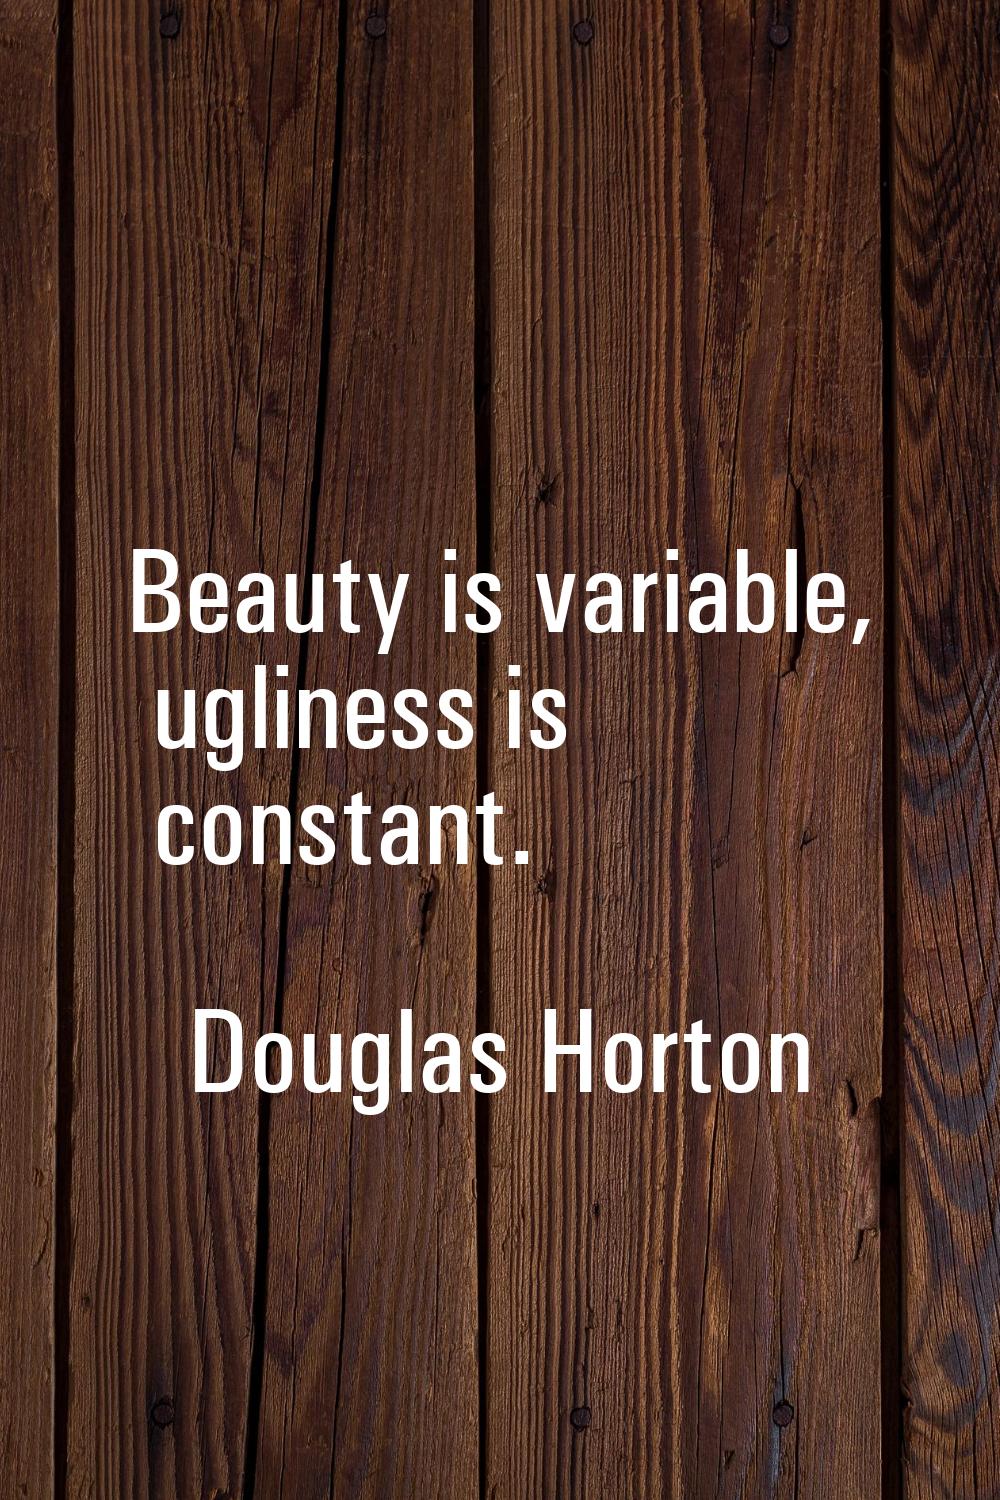 Beauty is variable, ugliness is constant.